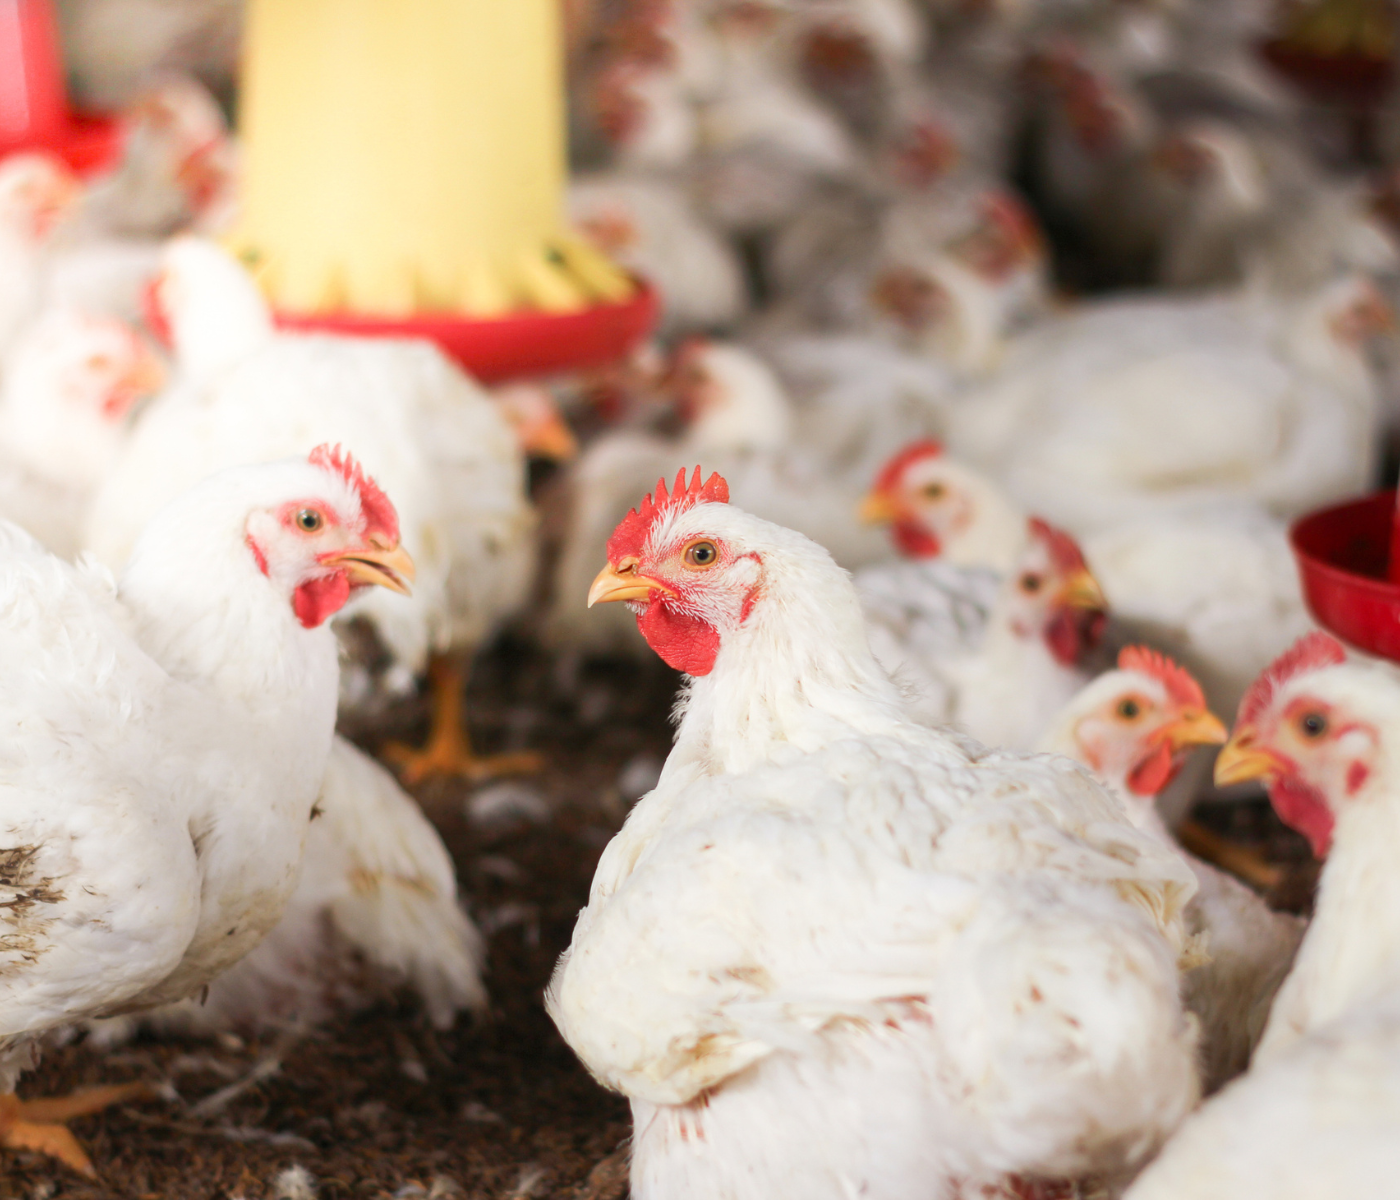 The poultry industry is growing fast in Pakistan